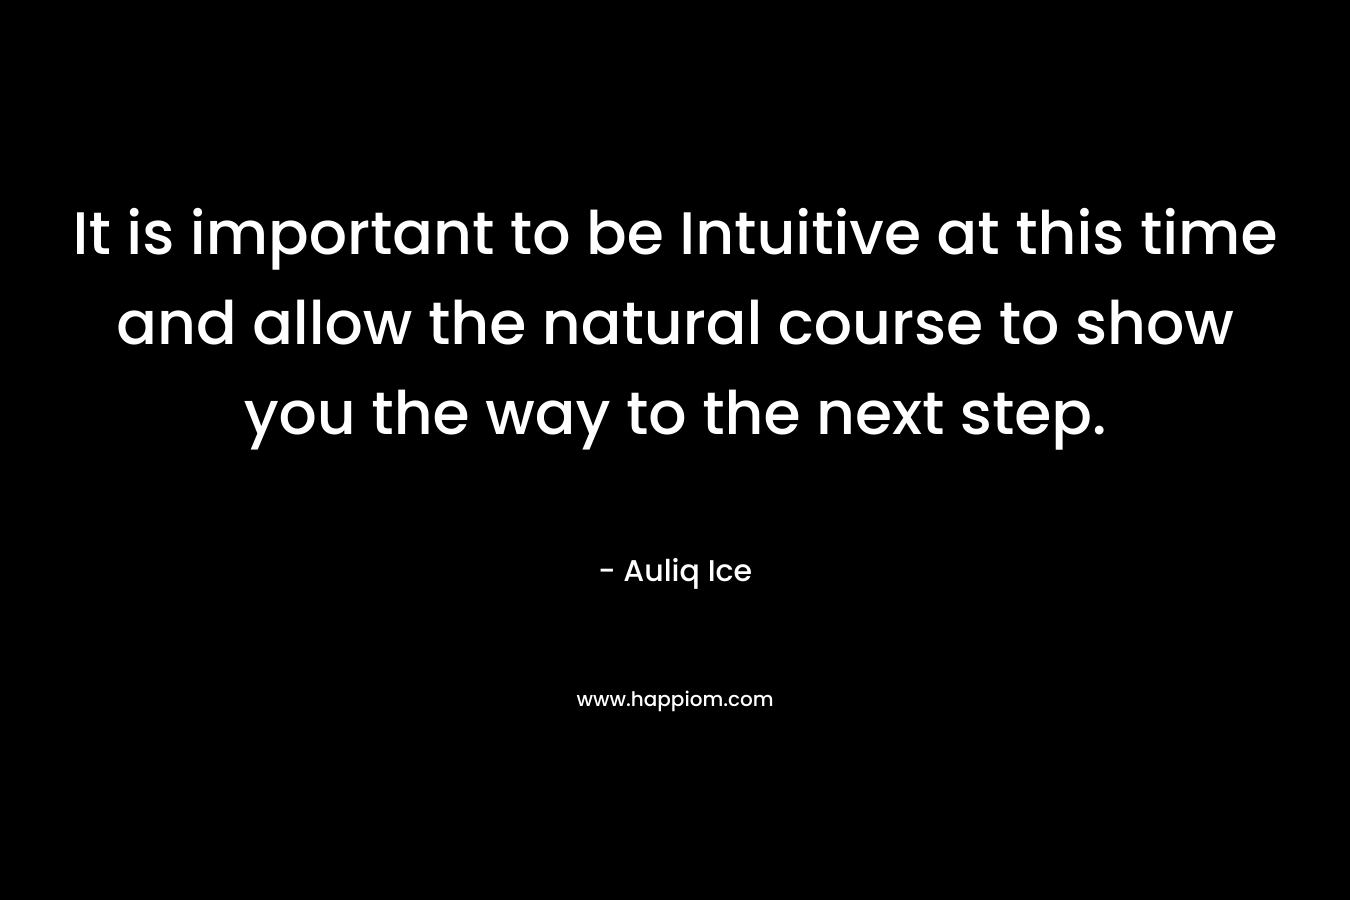 It is important to be Intuitive at this time and allow the natural course to show you the way to the next step.